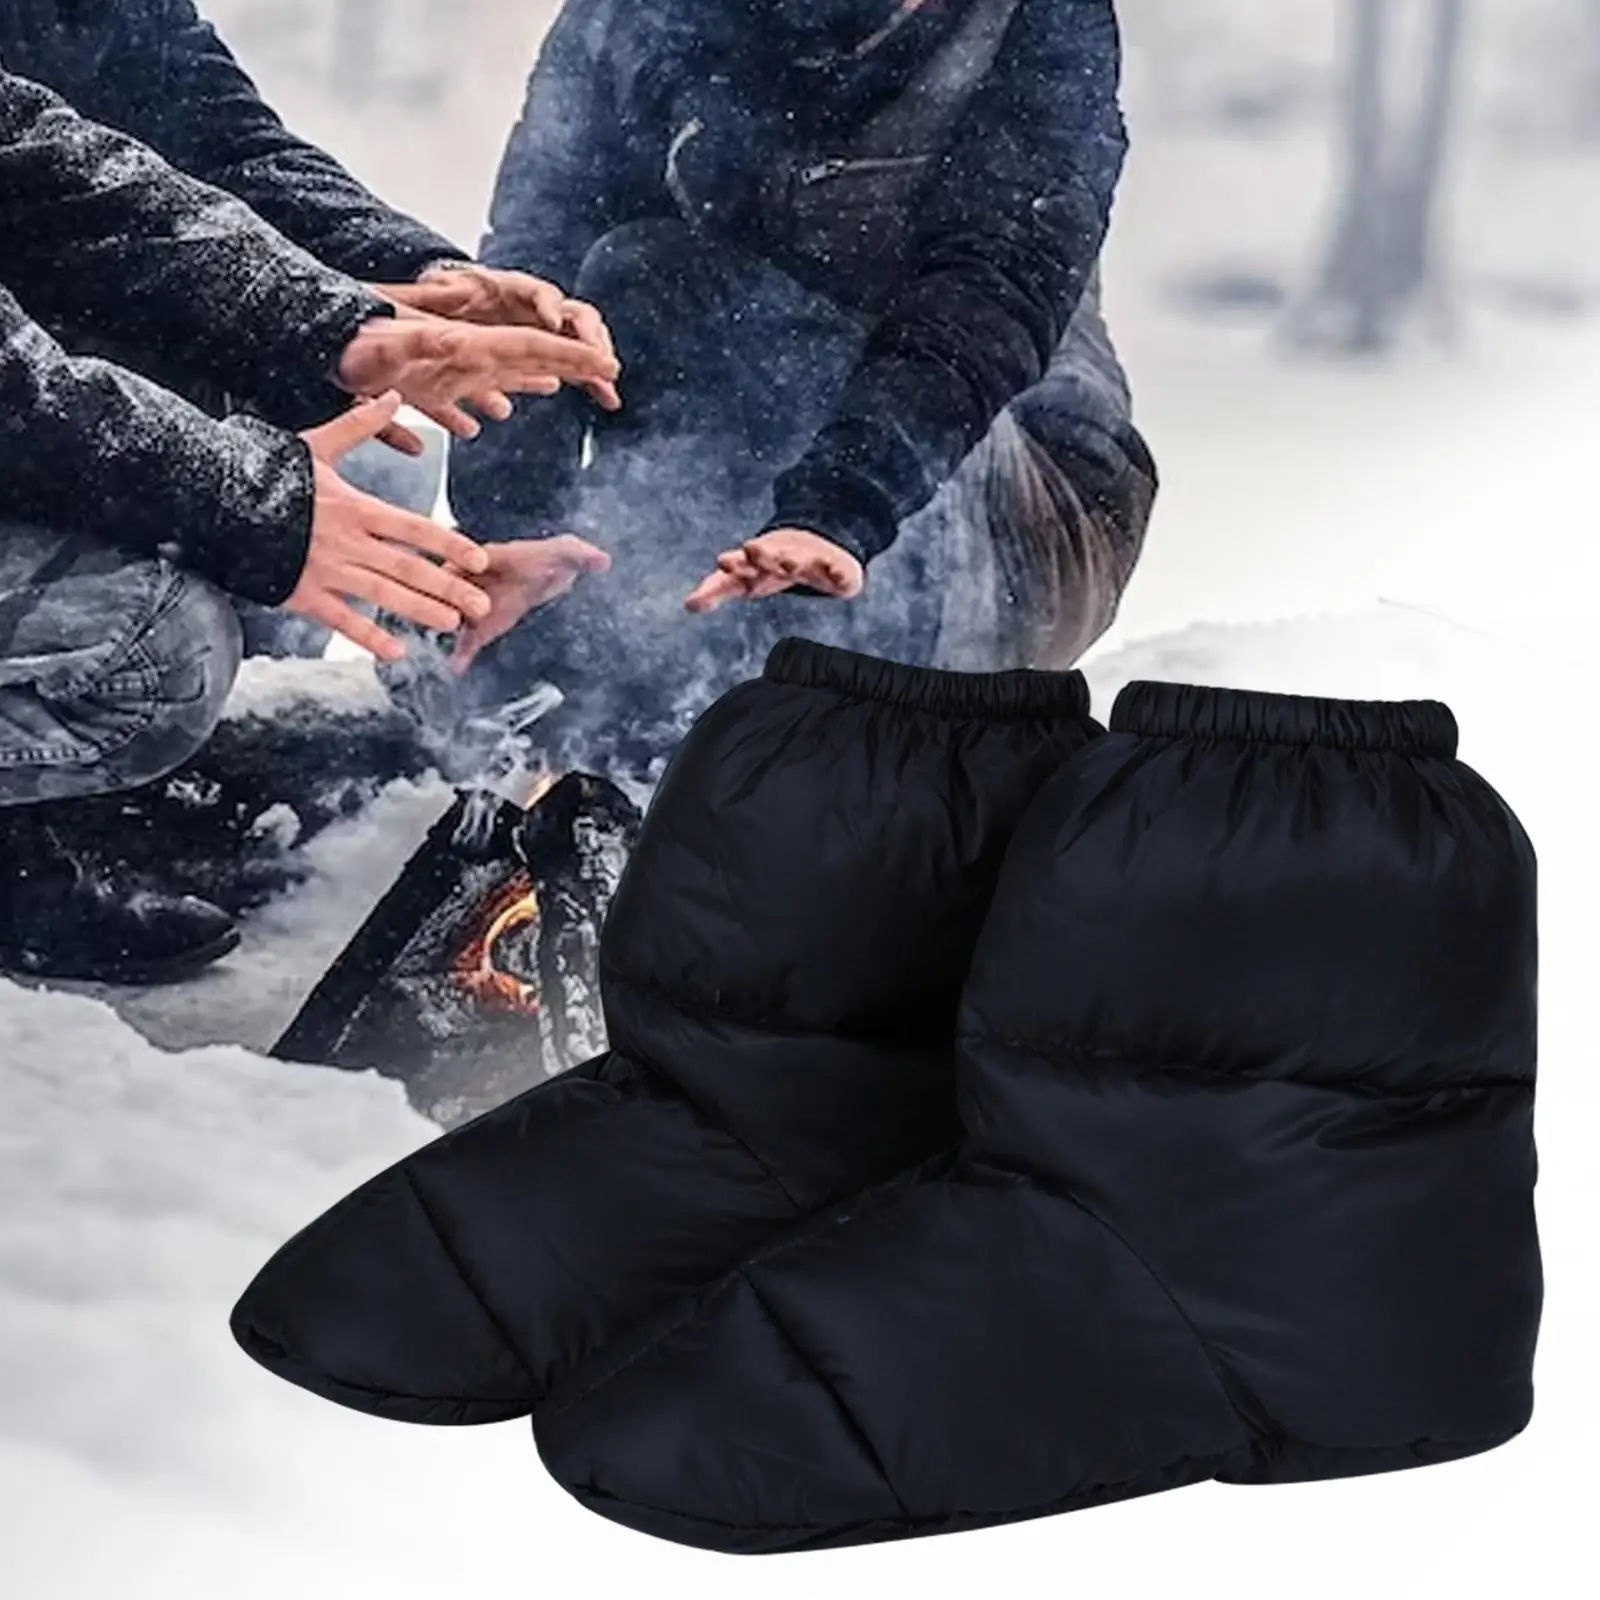 Winter Down Slippers Bootie Shoes Ultralight Comfortable Adults Feet Cover Socks for Skiing Hiking Outdoor Backpacking Indoor